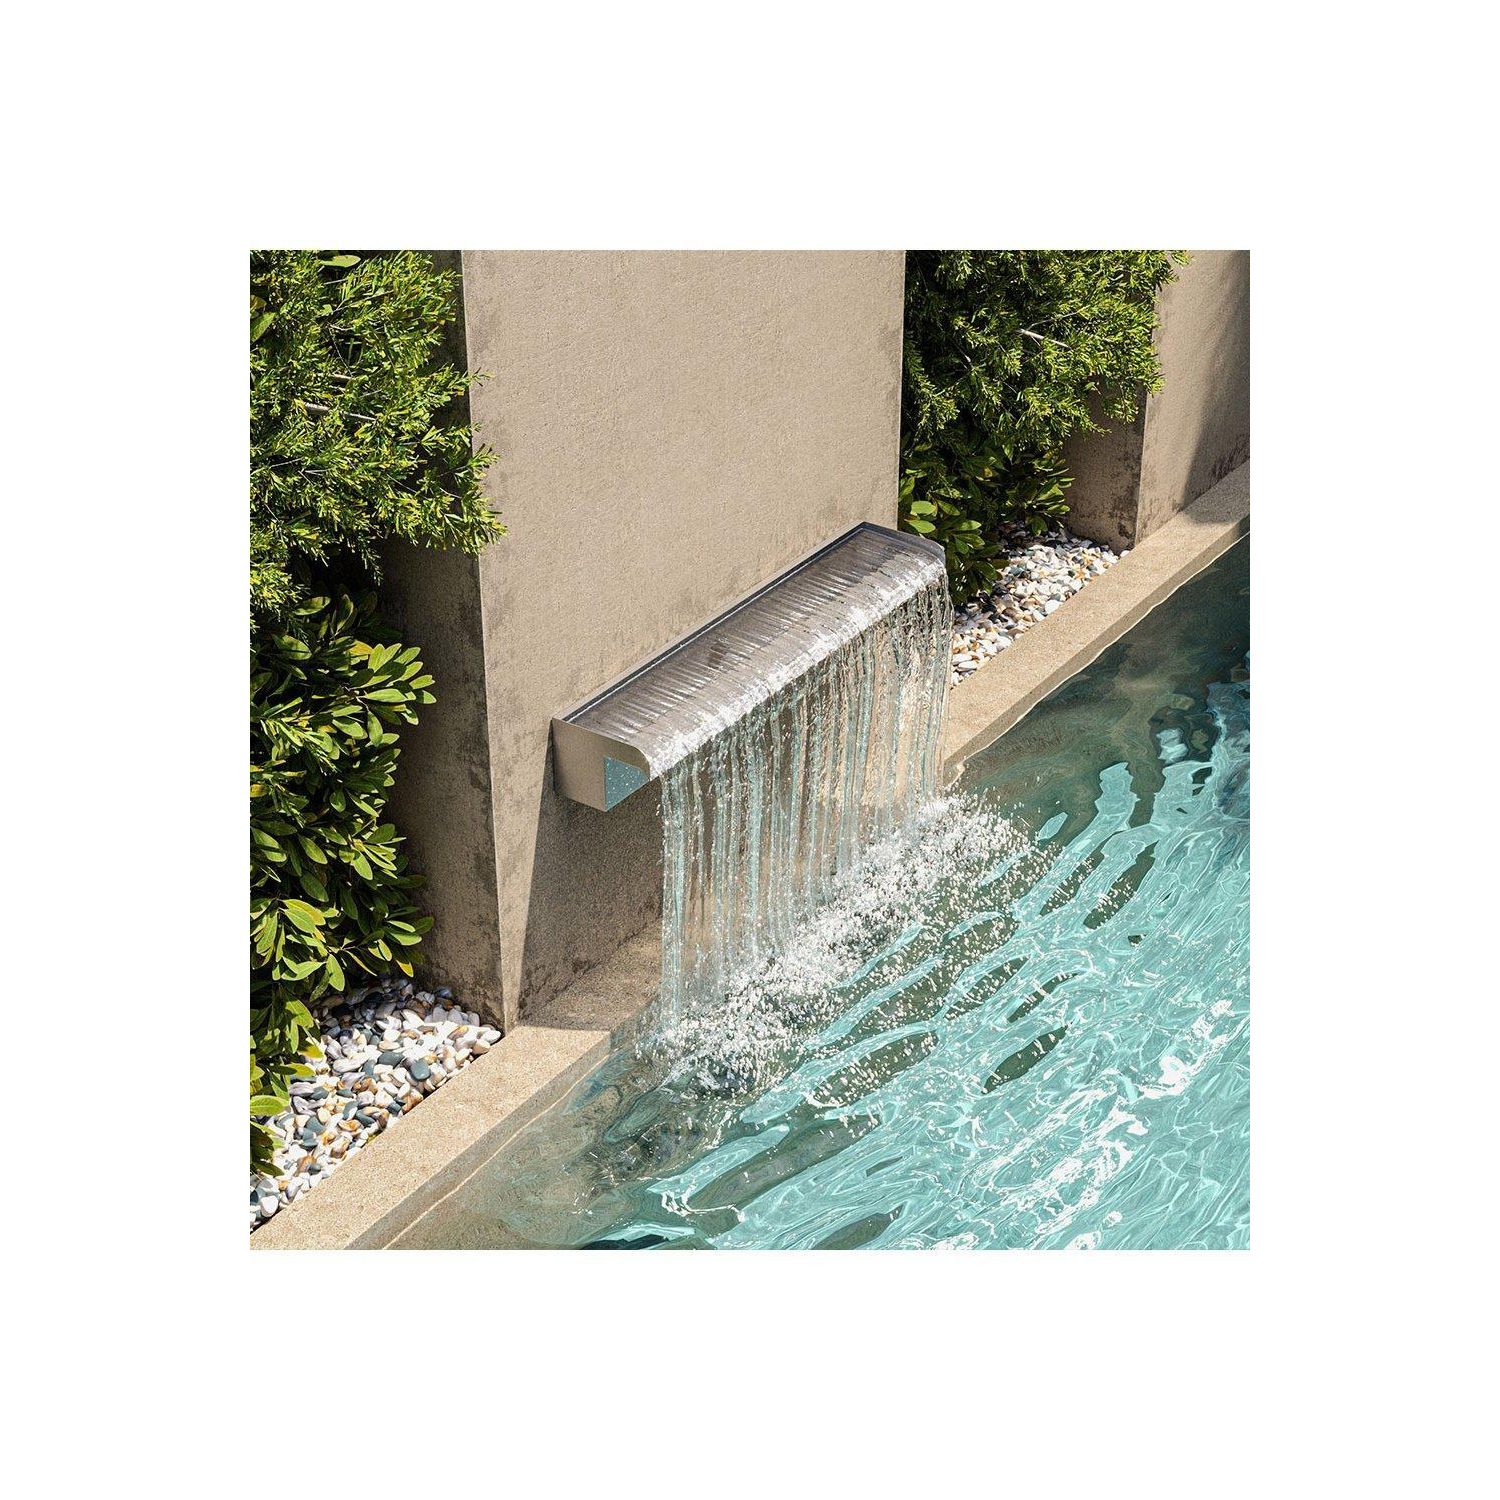 60cm Back Entry Waterfall Pool Fountain Garden Stainless Steel Wall-Mounted Water Blade - image 1